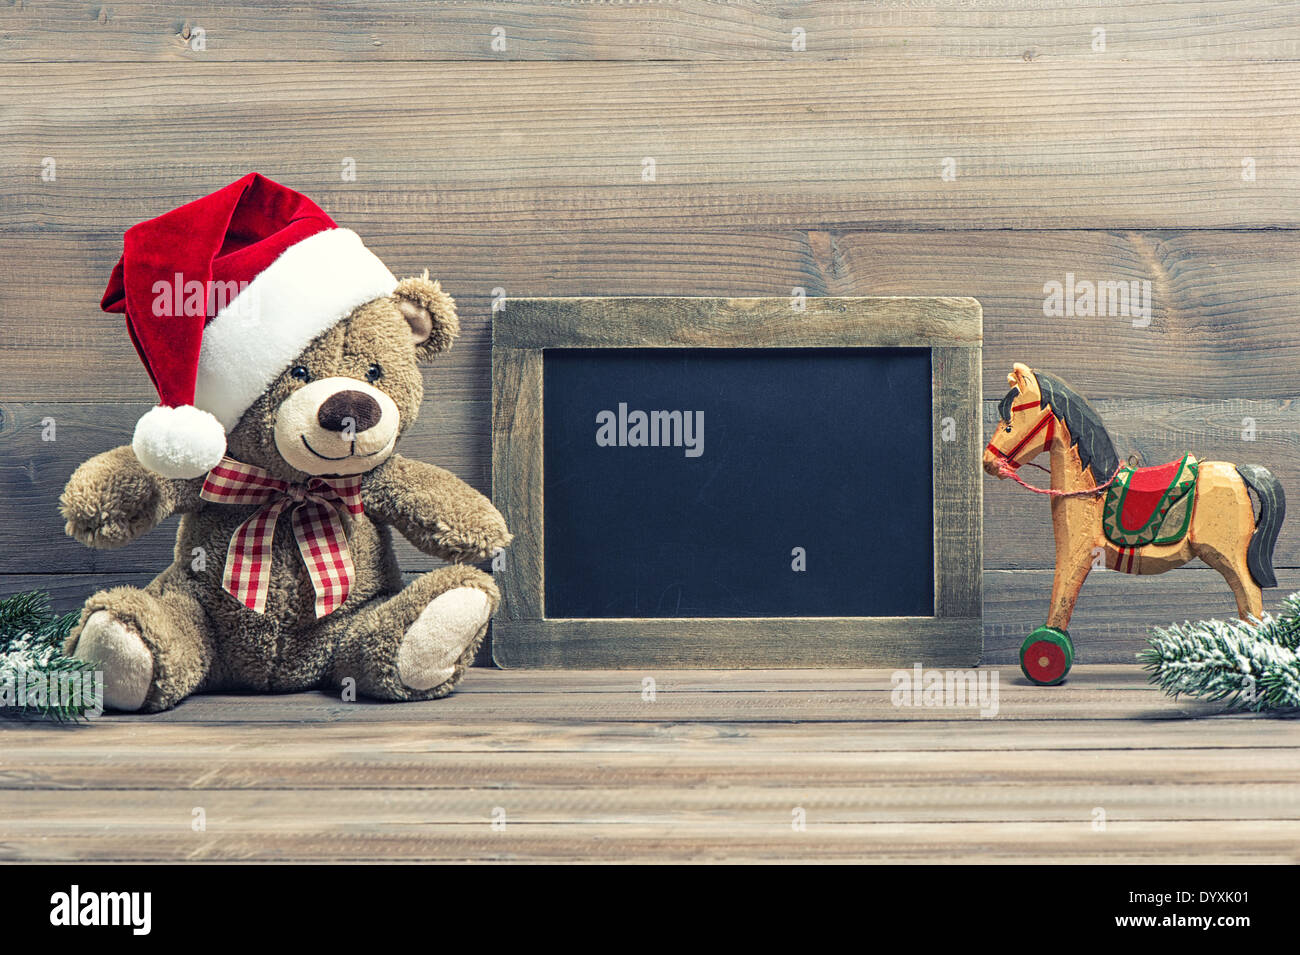 nostalgic christmas decoration with antique toys teddy bear and wooden rocking horse. vintage style picture with blackboard for Stock Photo